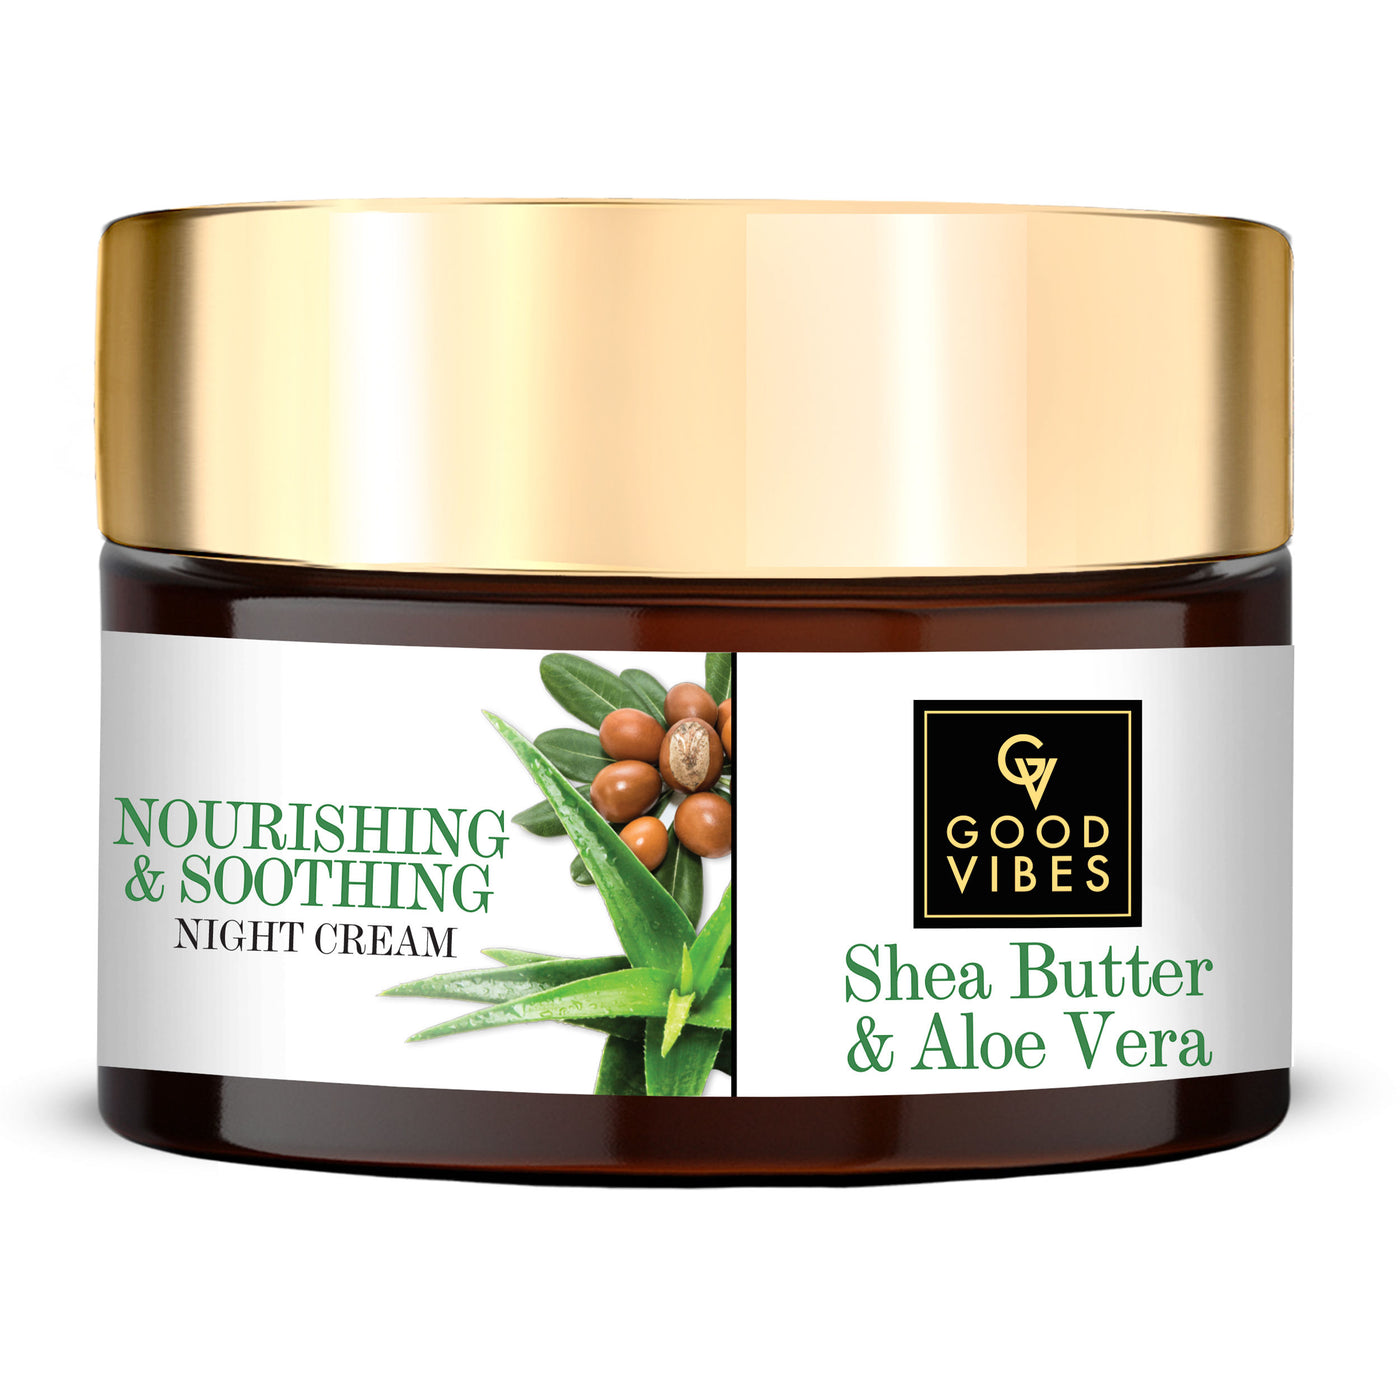 good-vibes-shea-butter-aloe-vera-nourishing-soothing-night-cream-moisturizing-soothing-no-parabens-no-sulphates-no-mineral-oil-50-gm-8